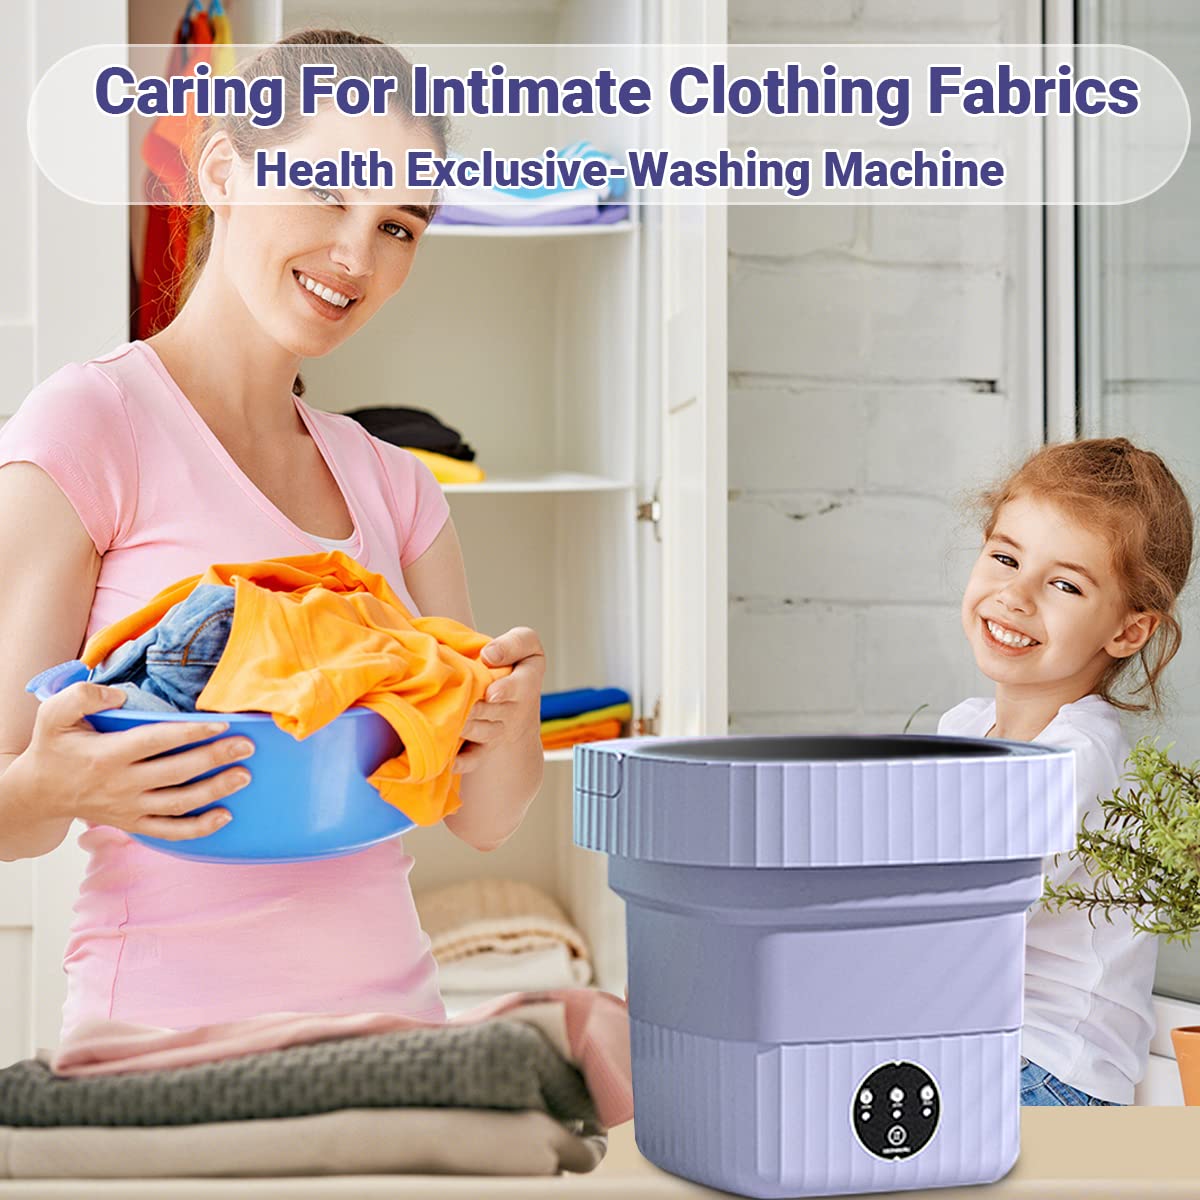 Portable Washing Machine, Foldable Mini Washing Machine for Socks, Baby Clothes, Towels, Underwear Or Delicate Items, Ideal for Apartment, Dorm, Camping, RV Travel and More (purple)